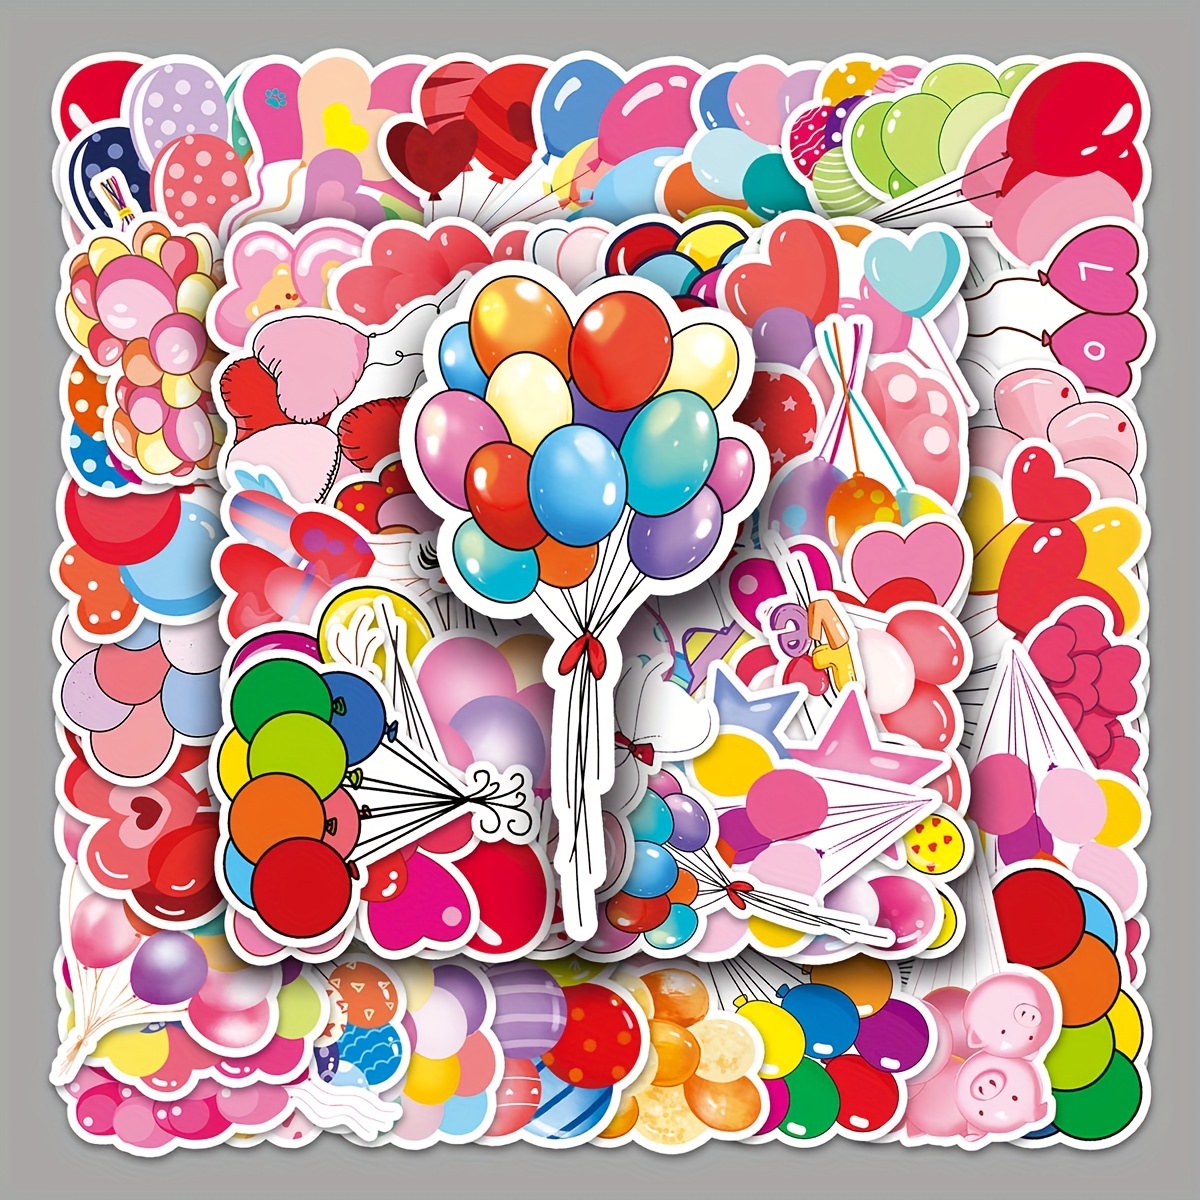 Balloons Stickers for Kids 50 Pcs Print Hot Air Balloon Shaped Valentines Gifts Stickers Decals for Decoration Laptops,Guitar,Motorcycle,Skateboard